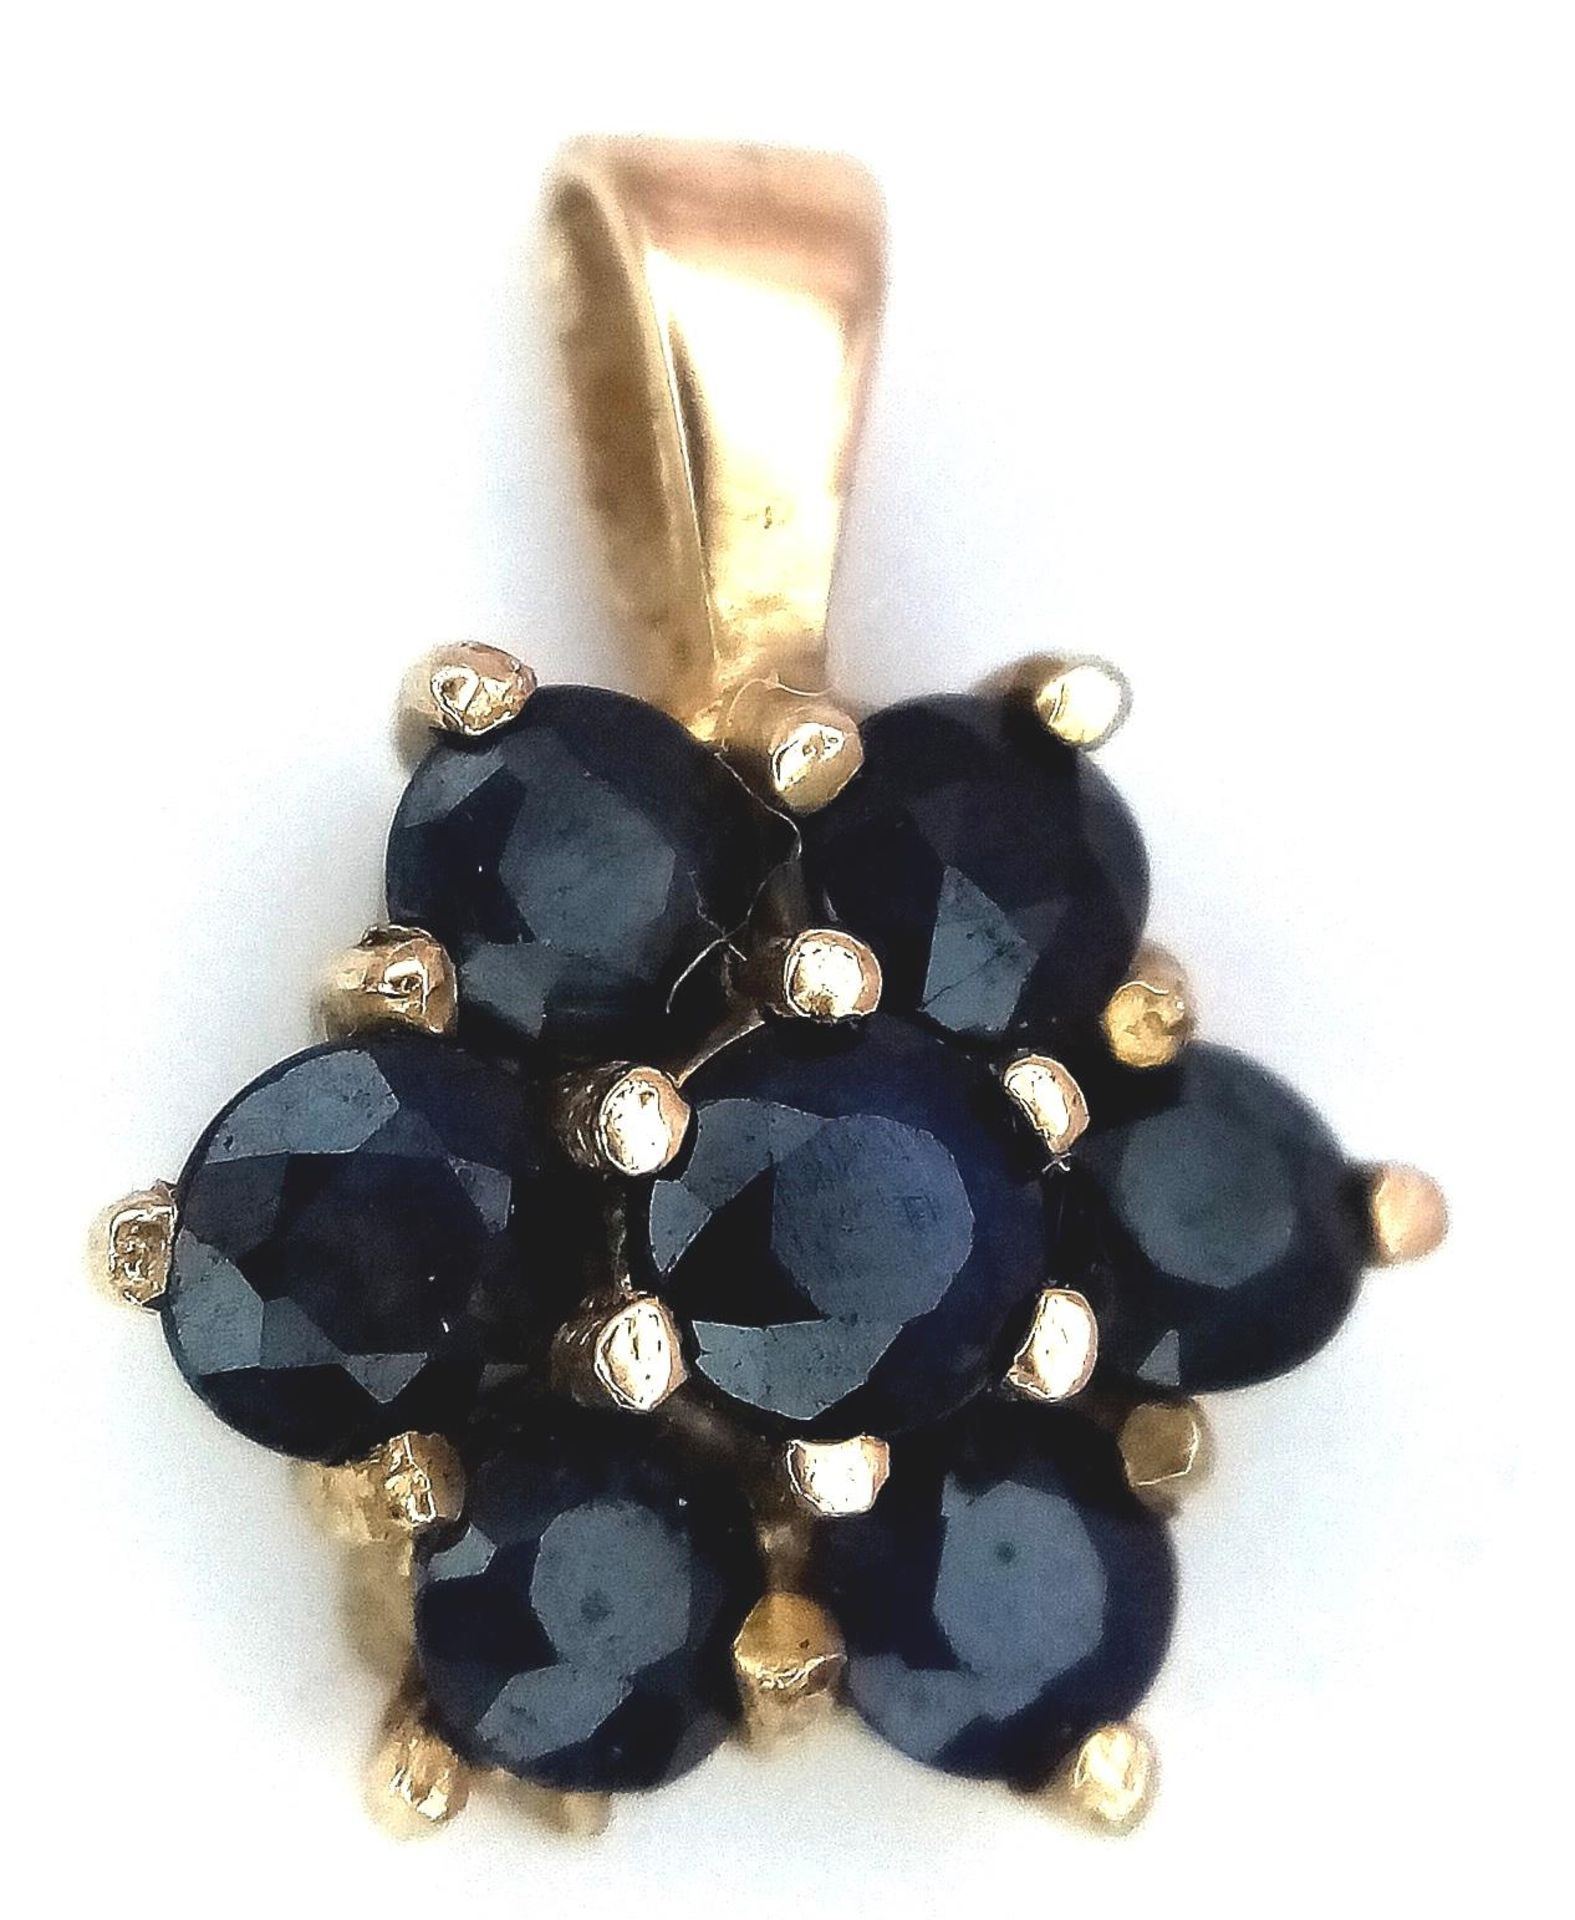 A 9K Yellow Gold Blue Stone (probably sapphire) Cluster Pendant. 1.4cm length, 1.1g total weight.